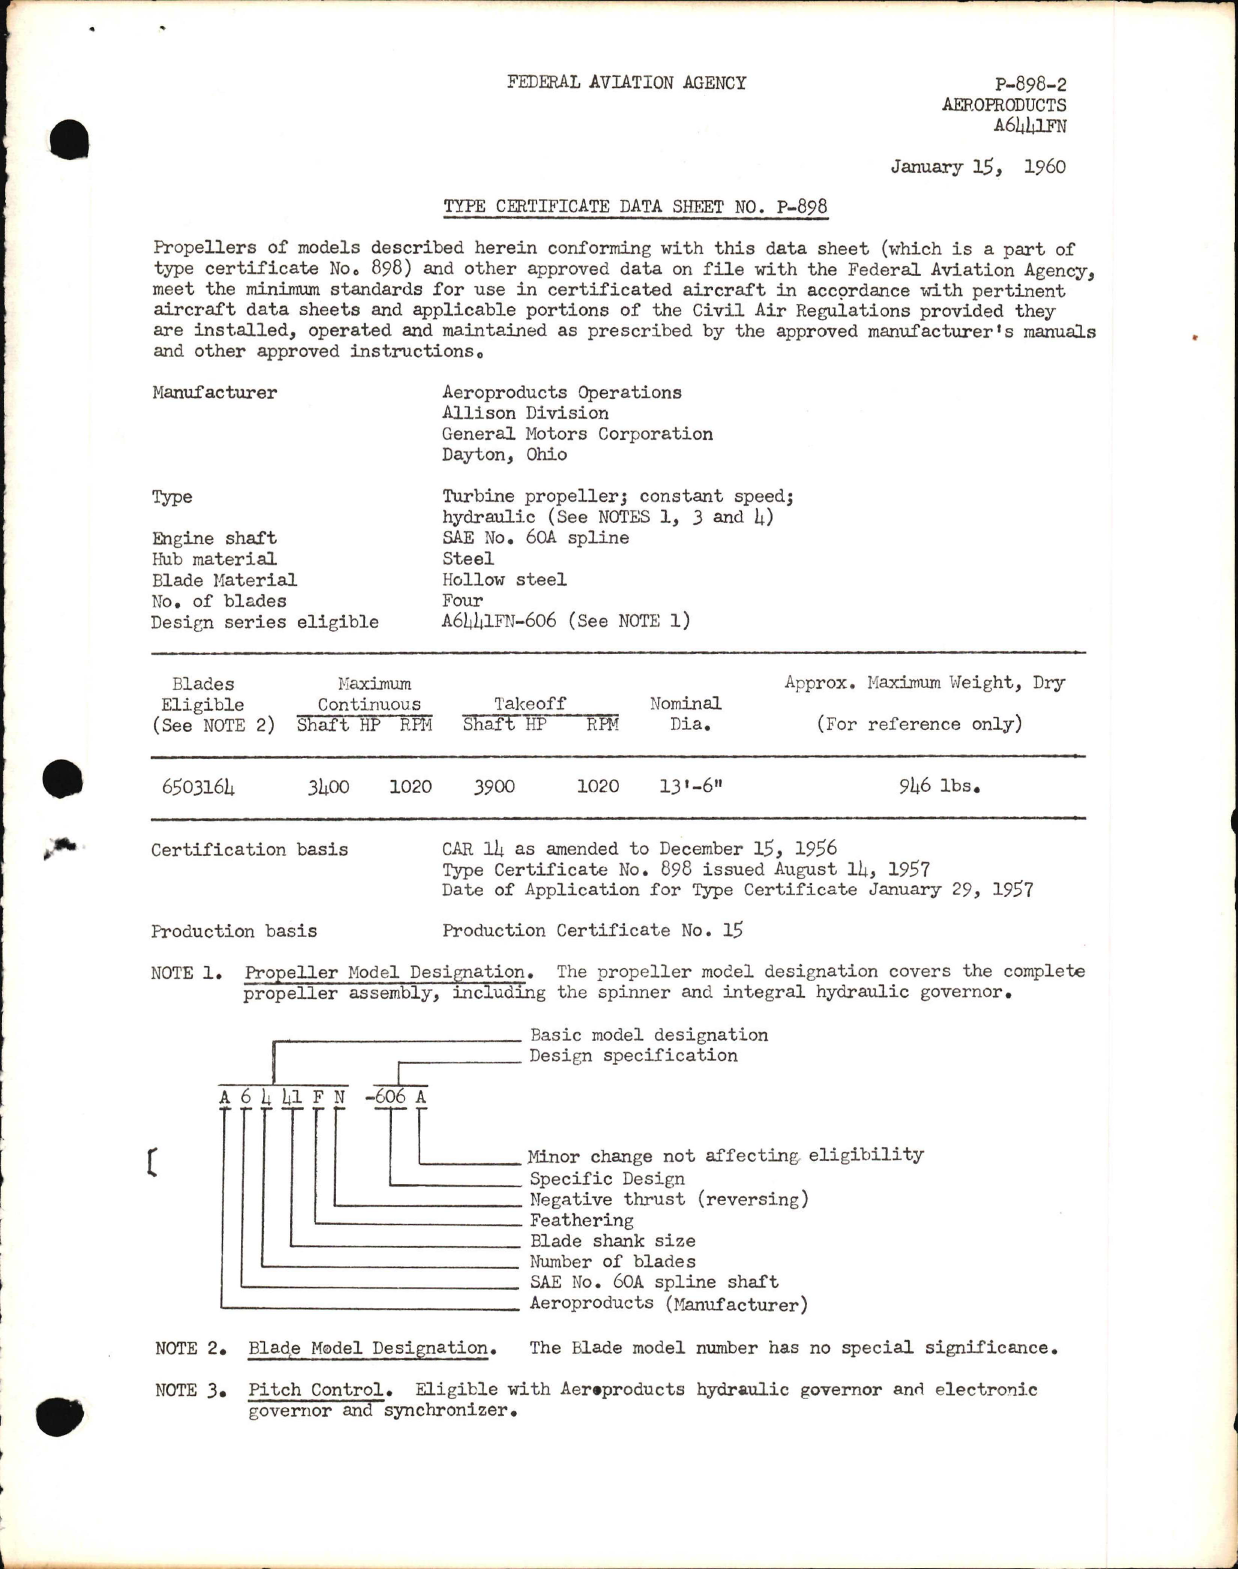 Sample page 1 from AirCorps Library document: A6441FN